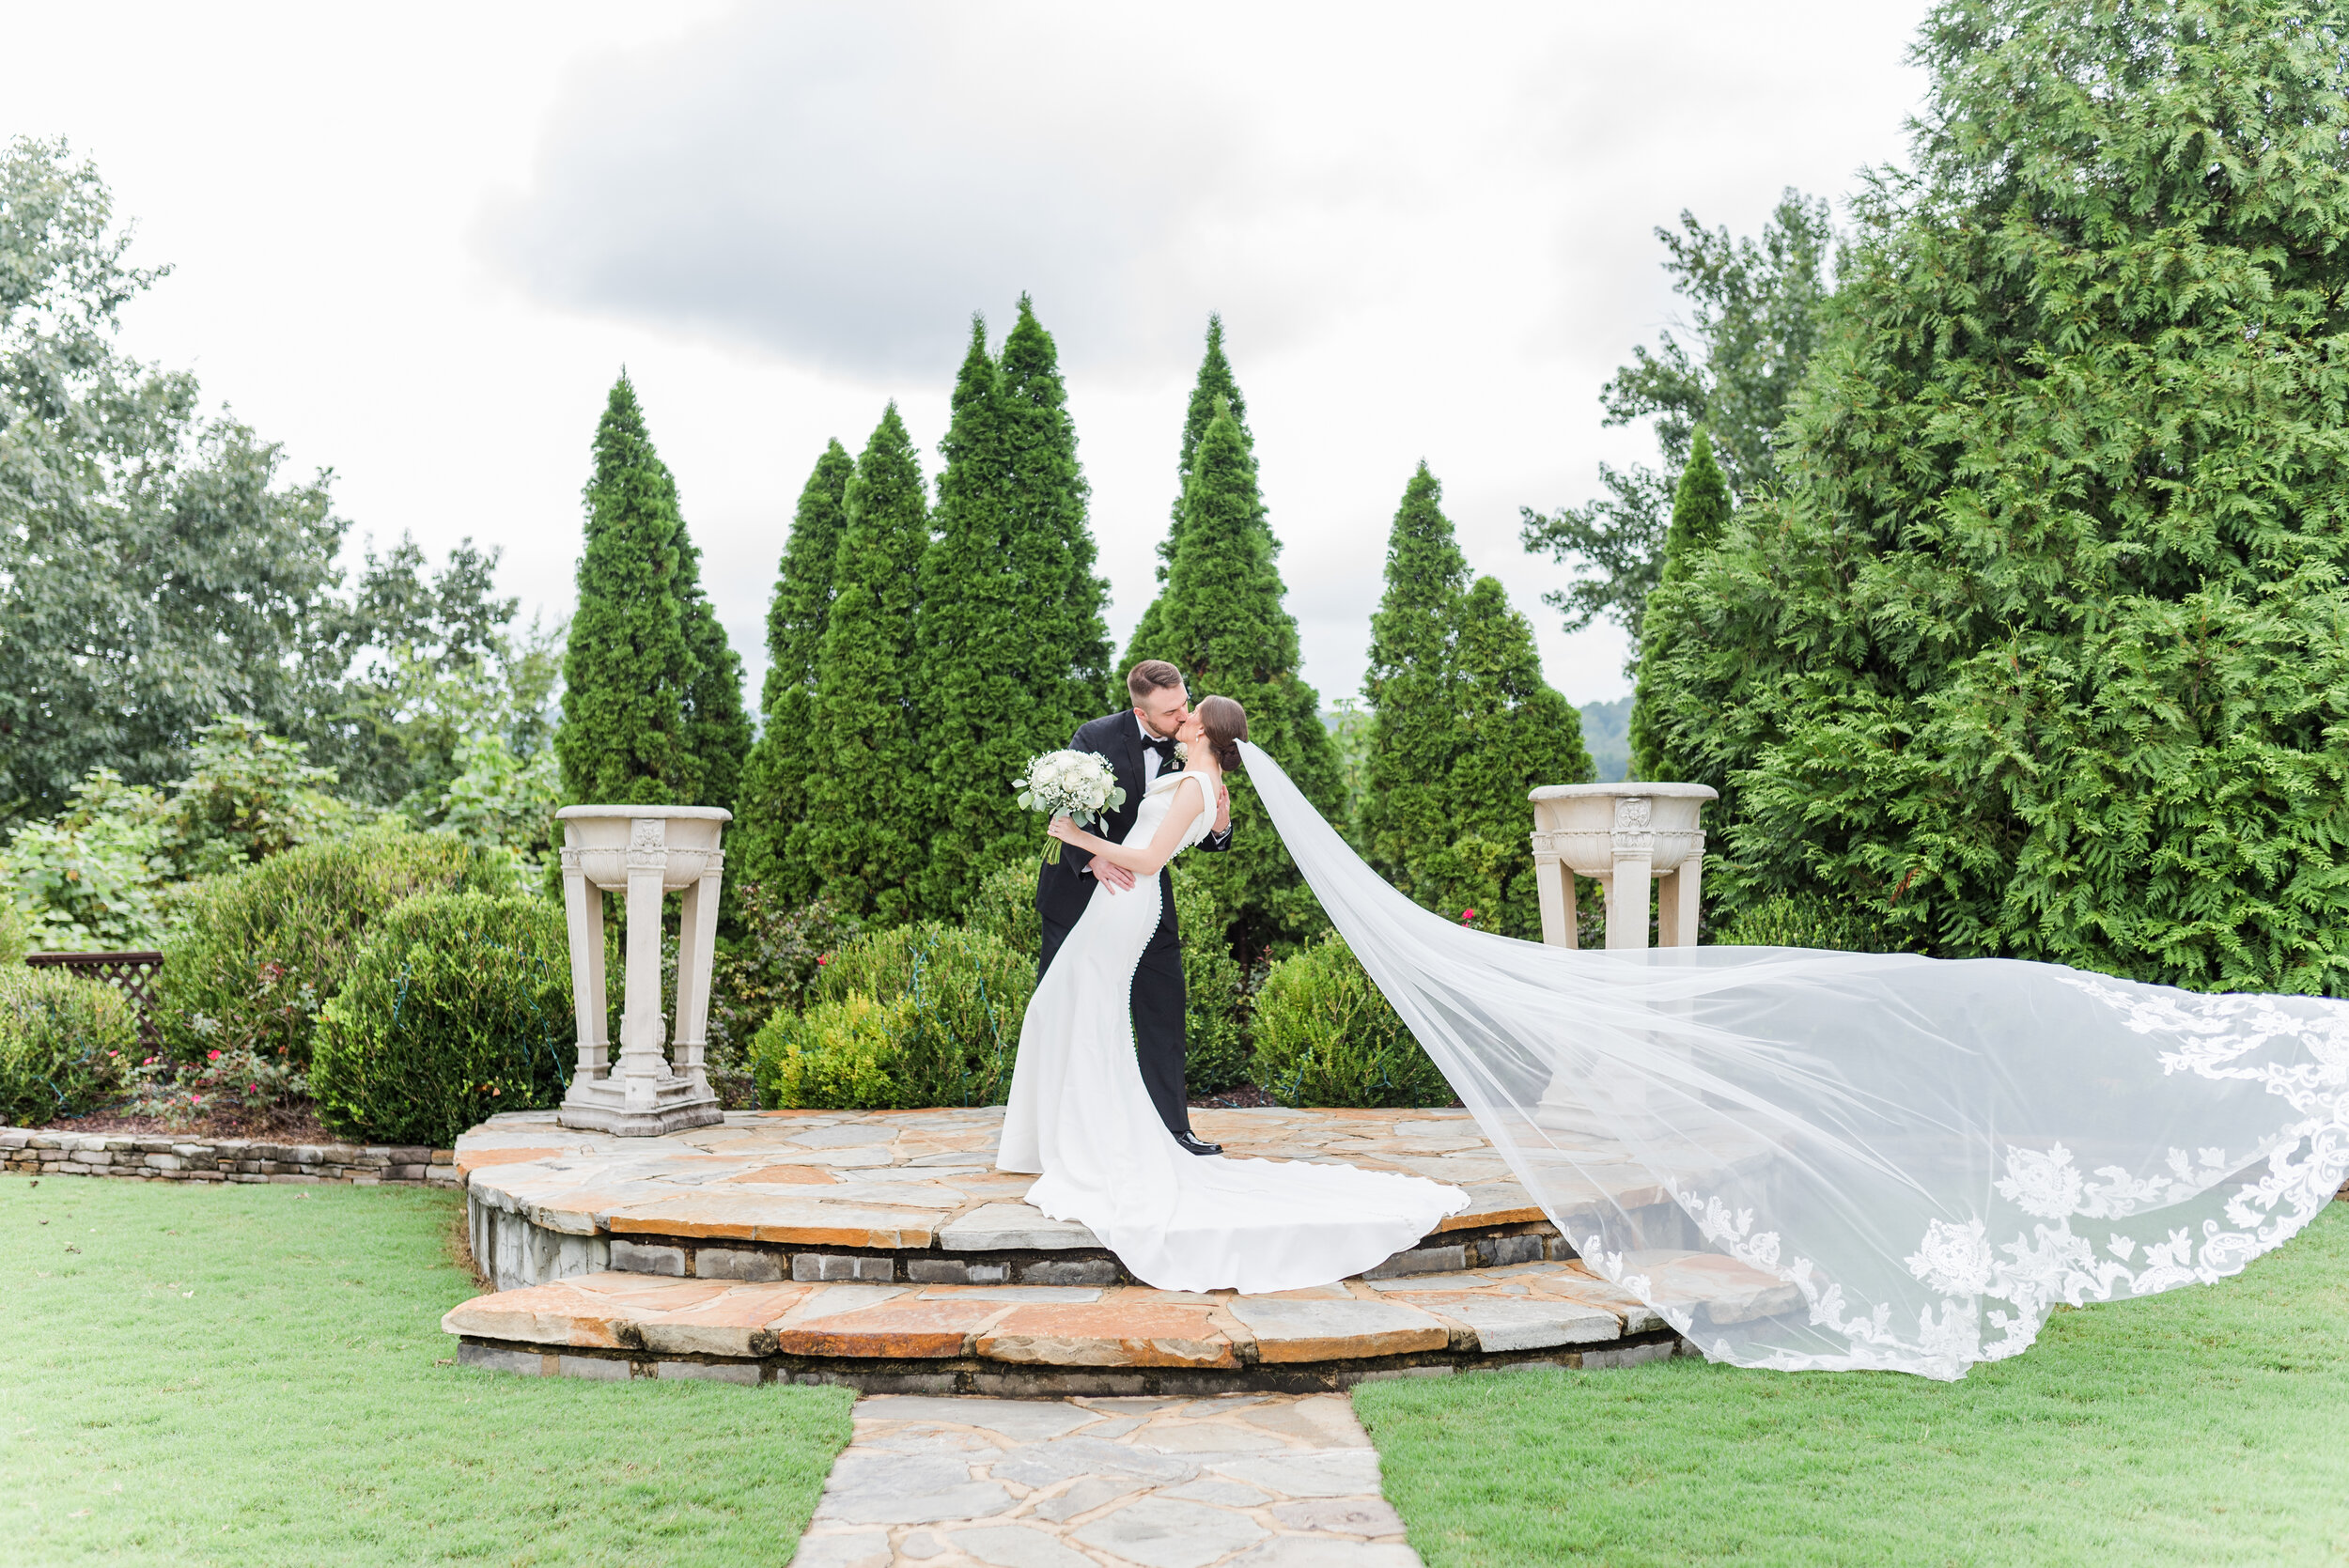 Park Crest Event Facility in Hoover Alabama Wedding Photographed by Kristen Marcus Photography